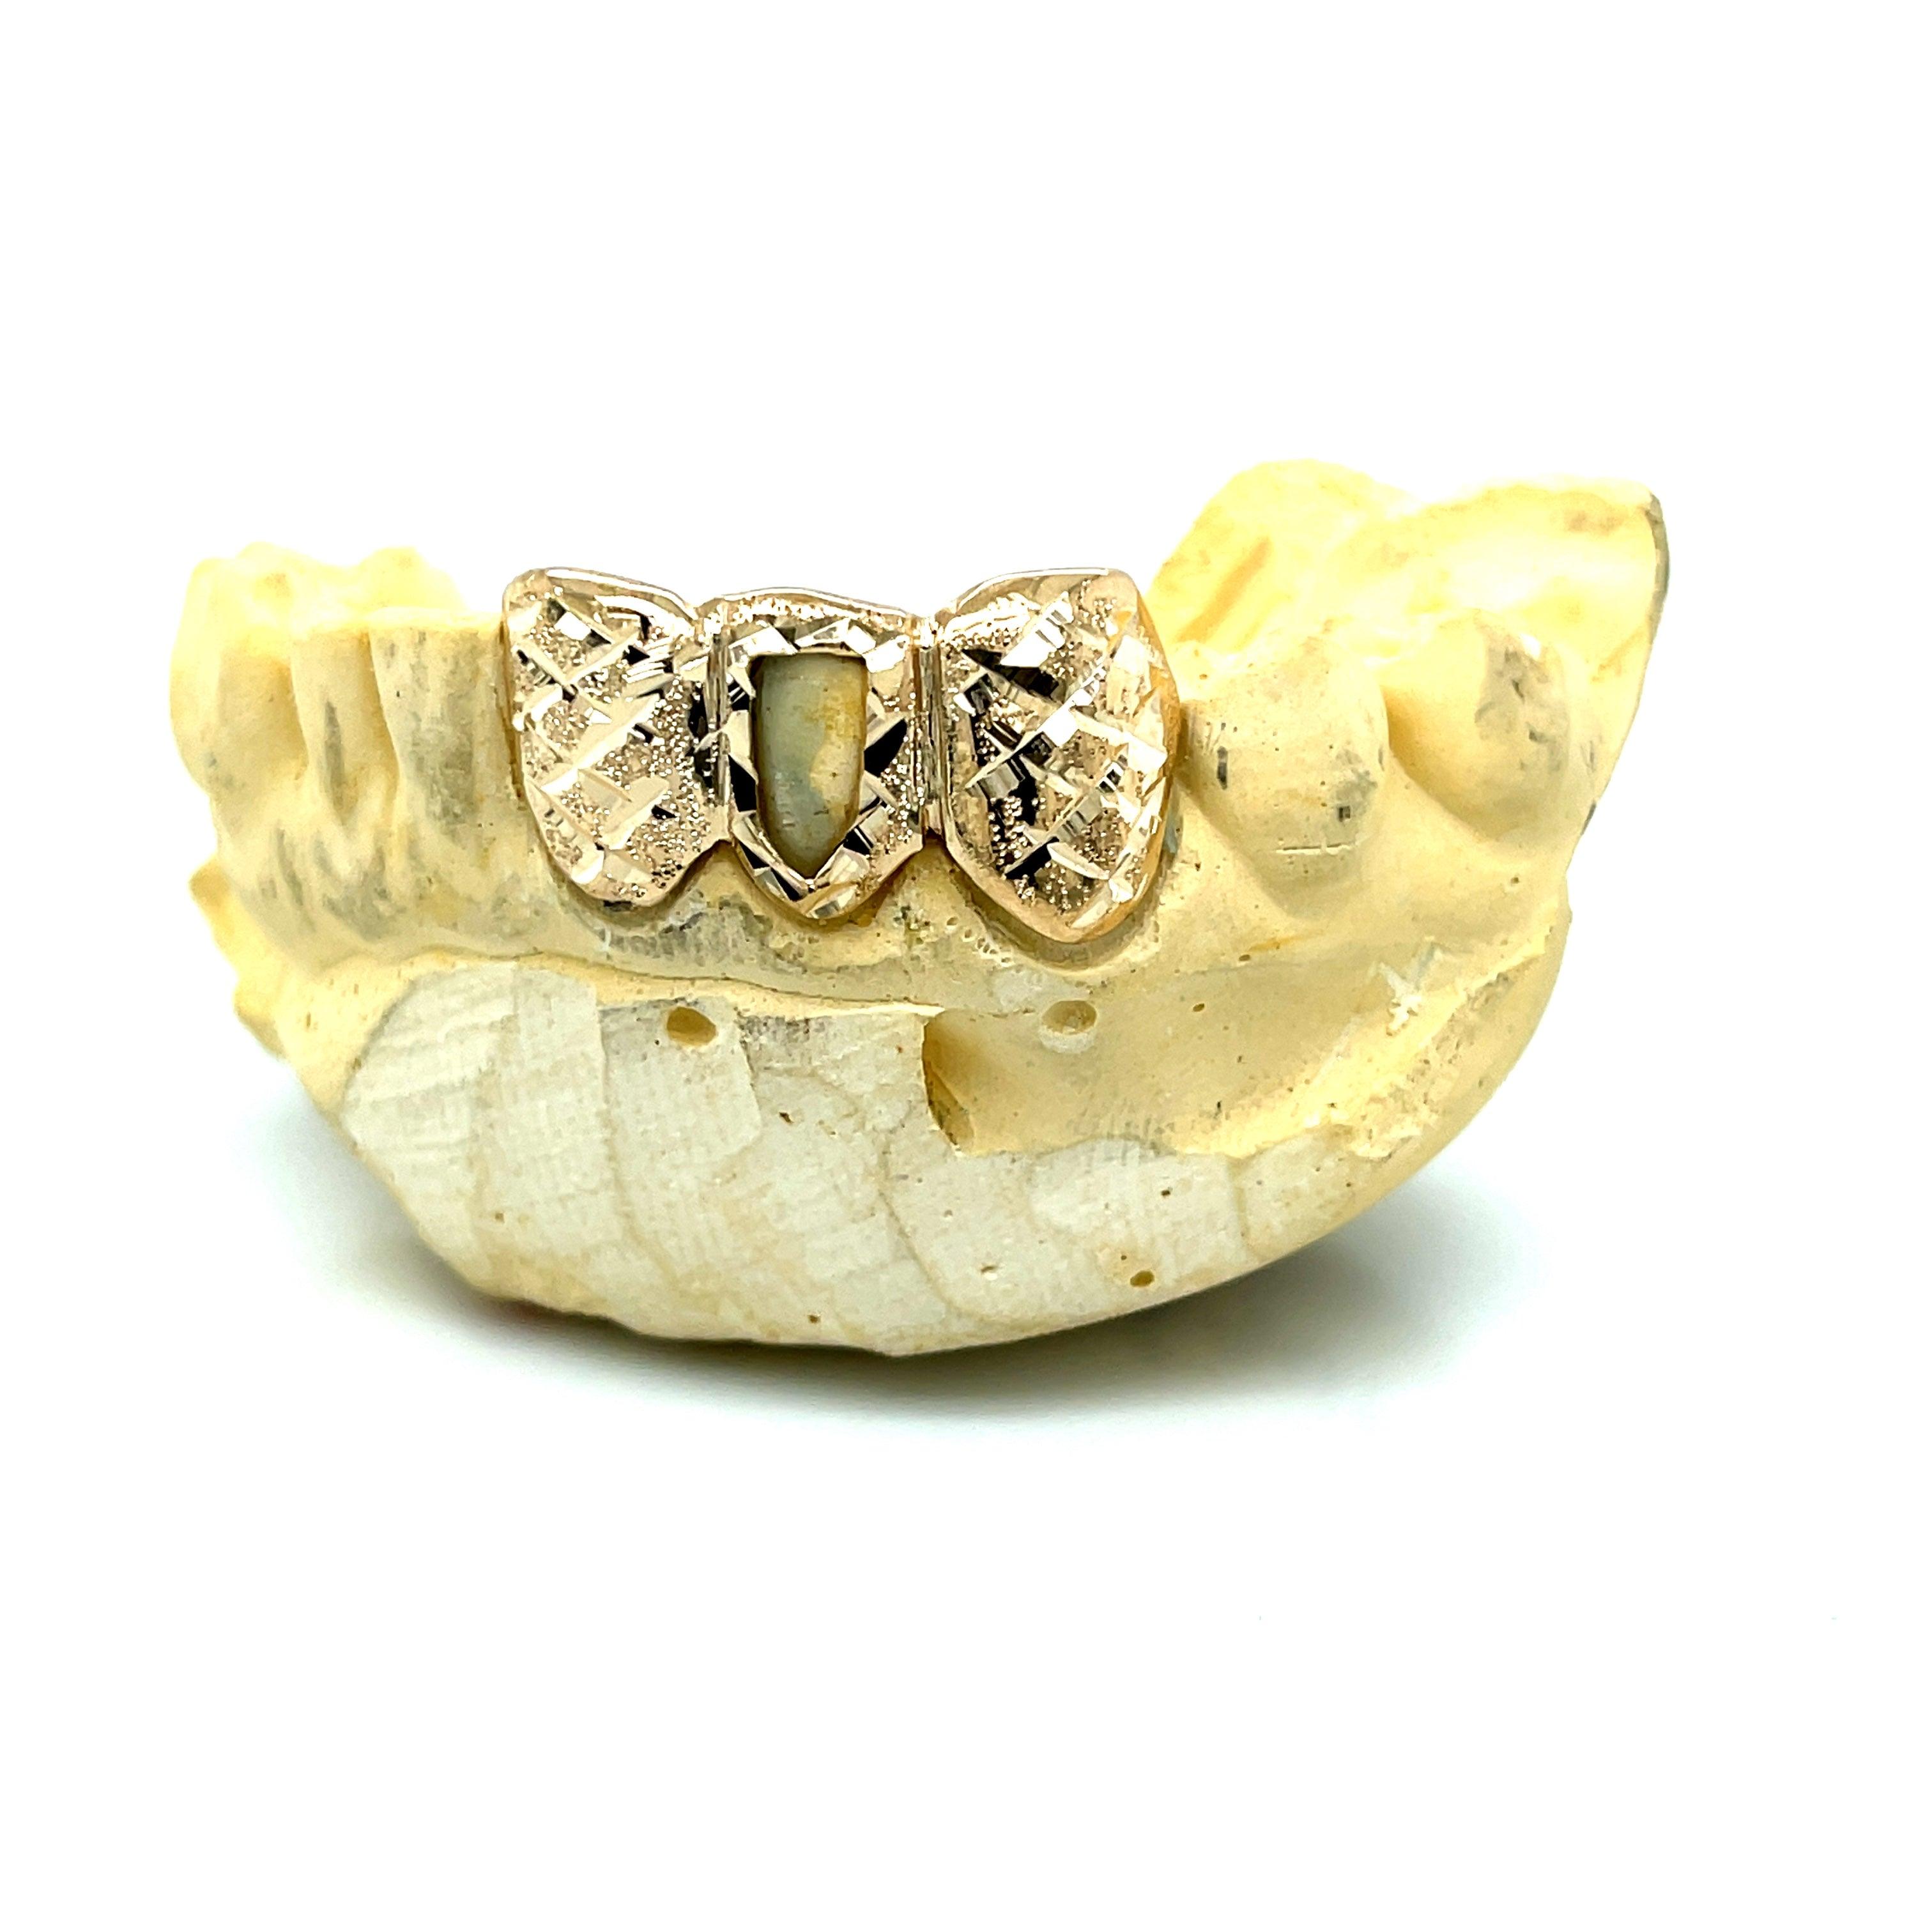 3pc Gold Snowflake Open Face Top Grillz - Seattle Gold Grillz